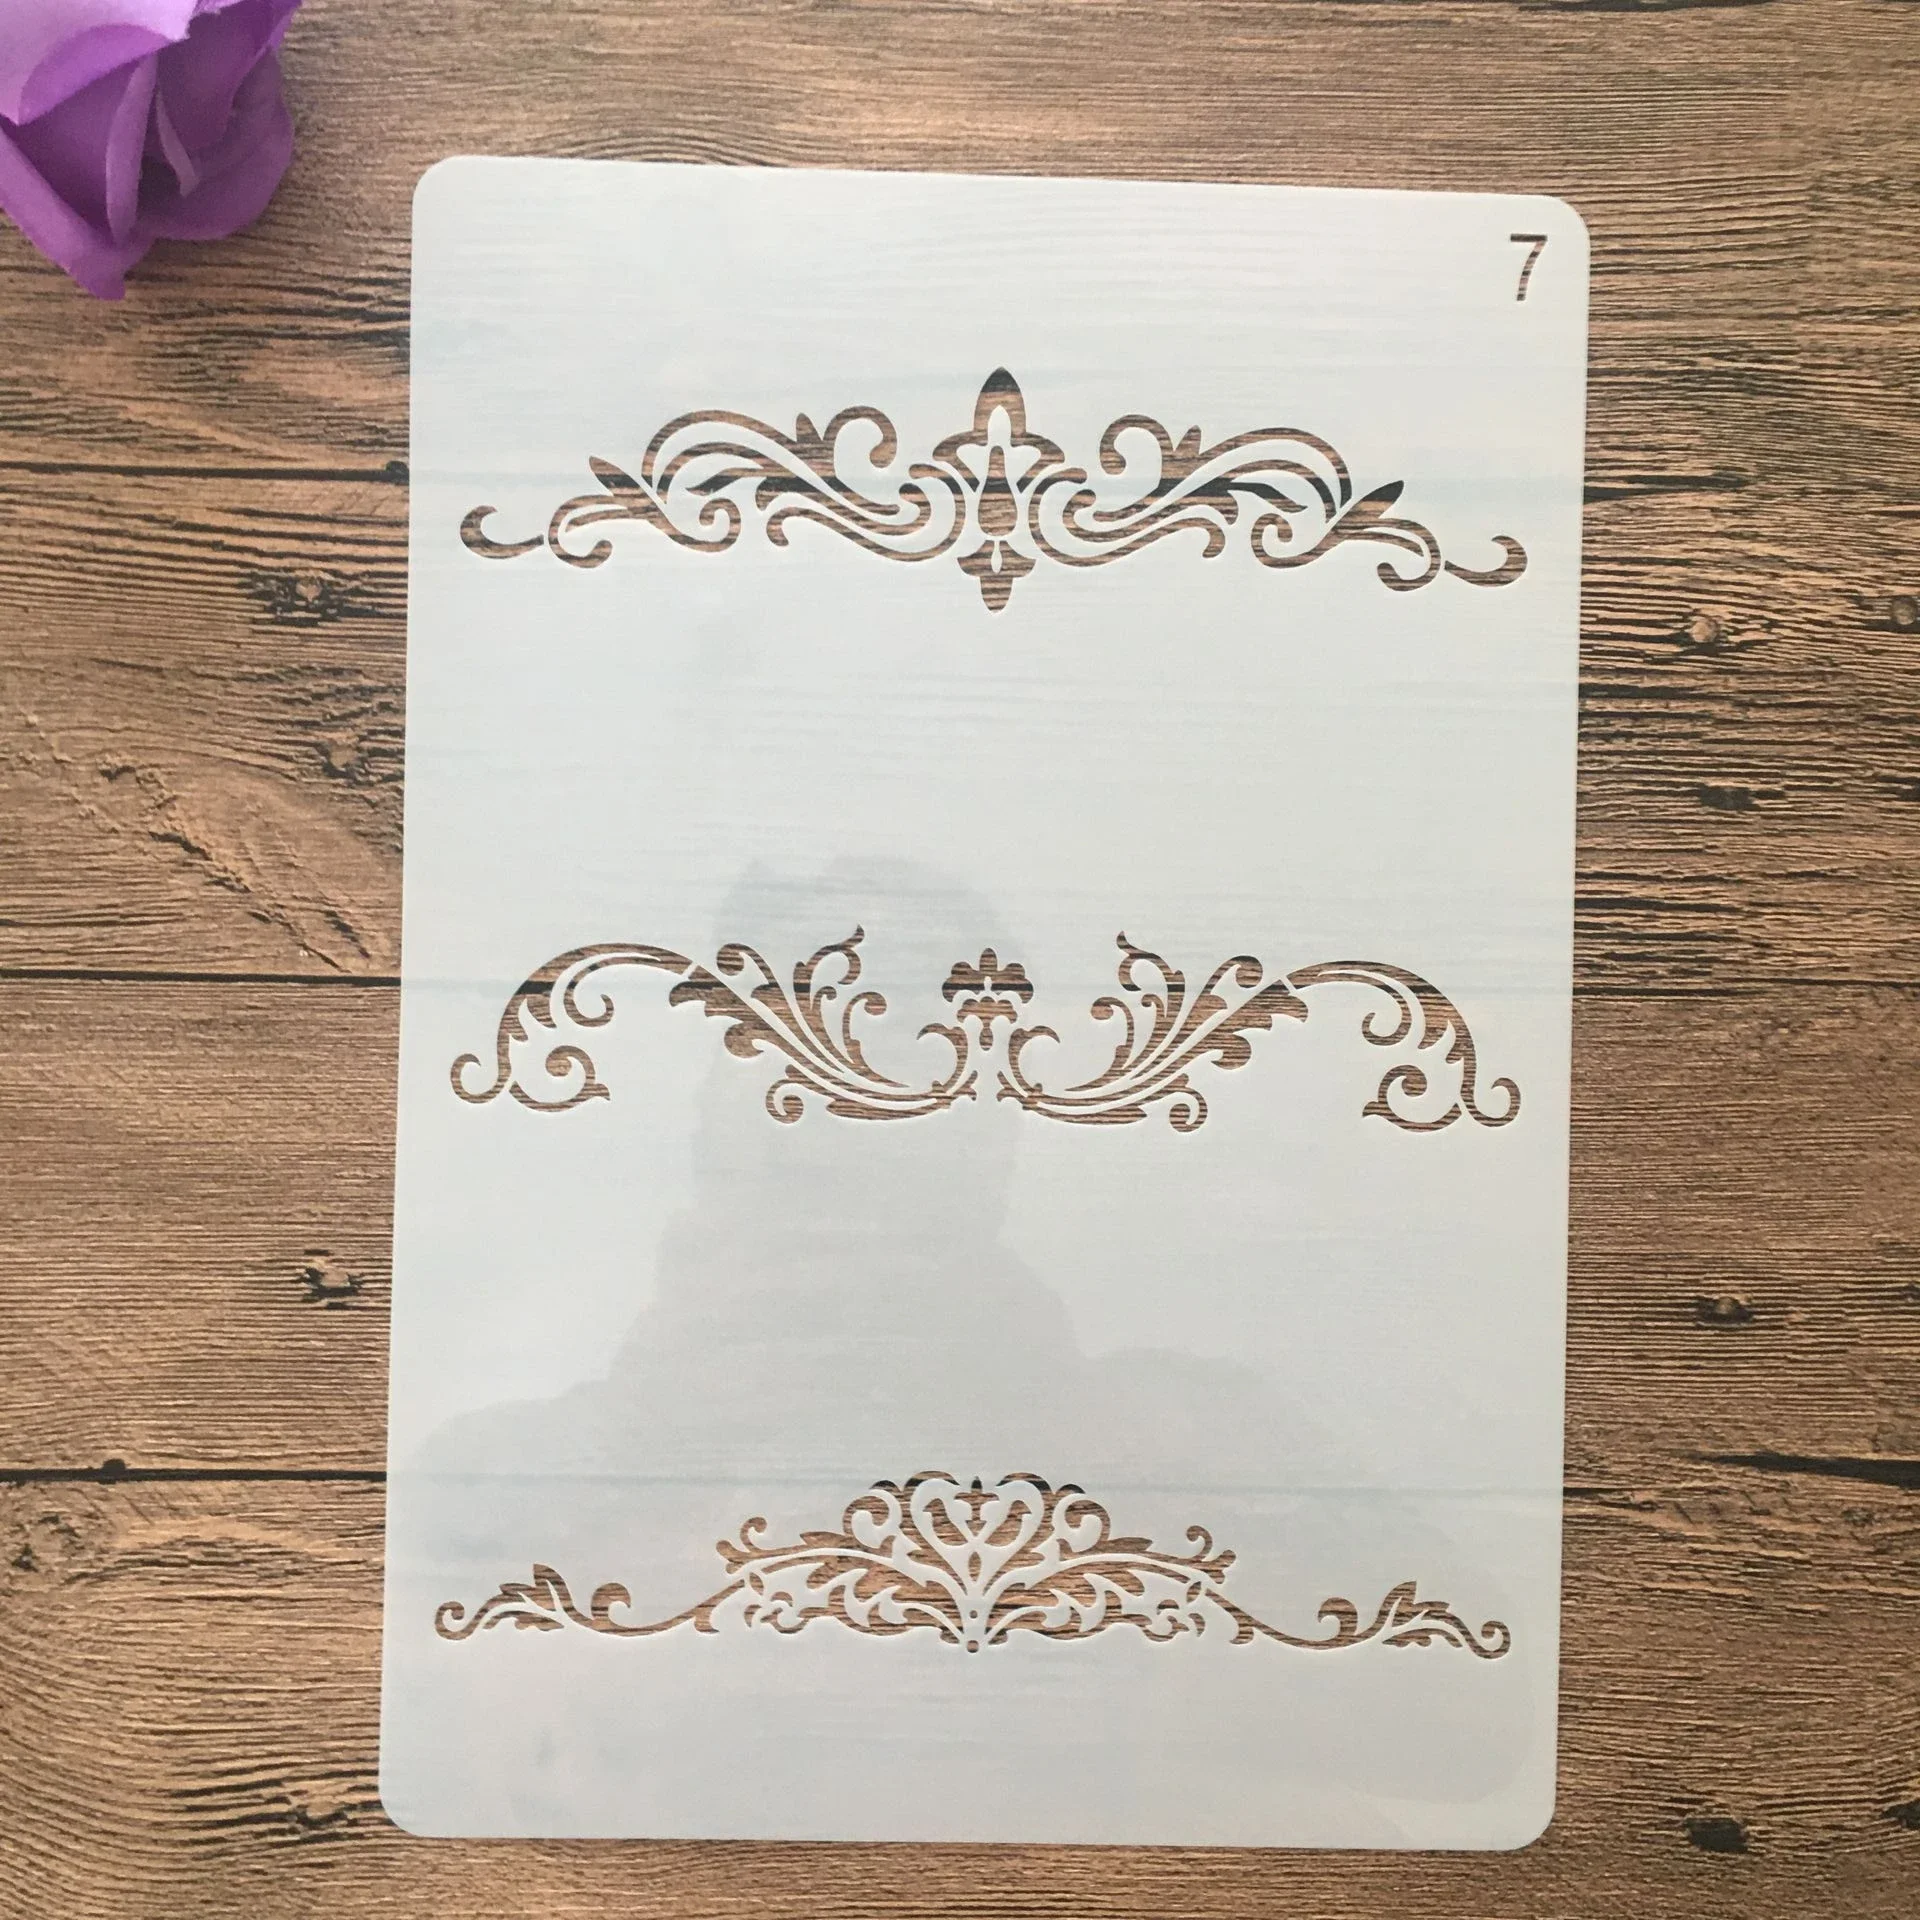 A4 29 * 21cm Crown Flower wall layered stencil painting scrapbook stamp album decoration embossed paper card template decoration custom luxury custom printing embossed 500gsm cotton paper cardboard name business card luxury thank you card for small busines